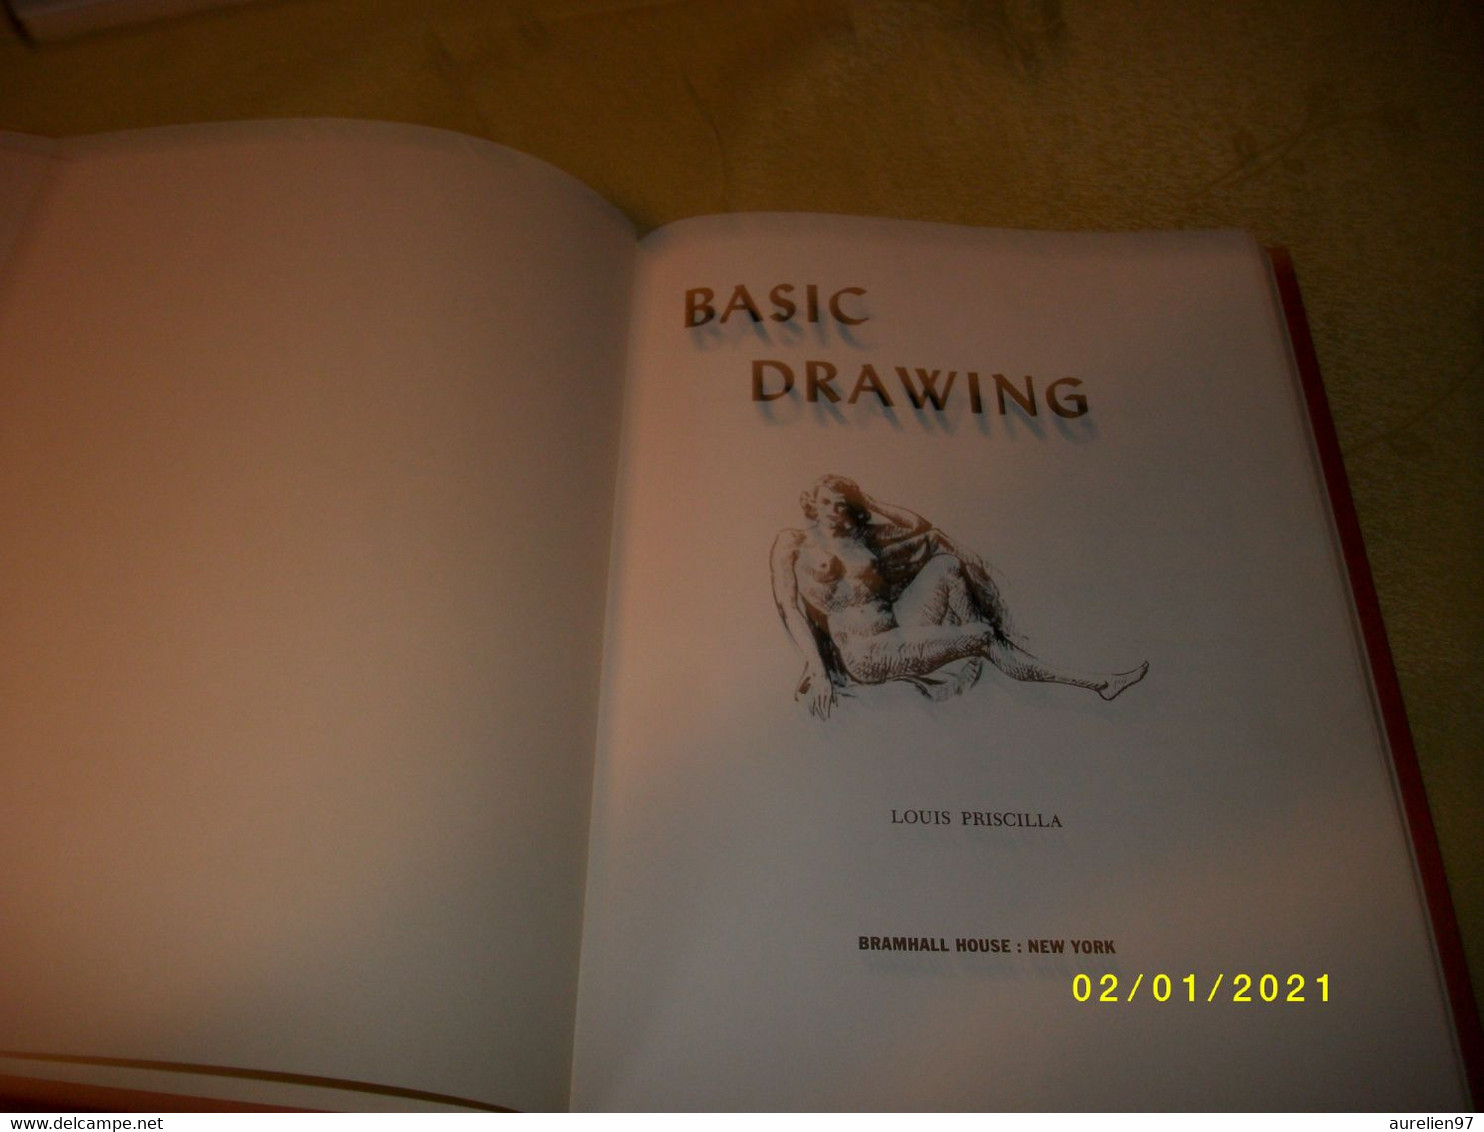 Basic Drawing - Culture